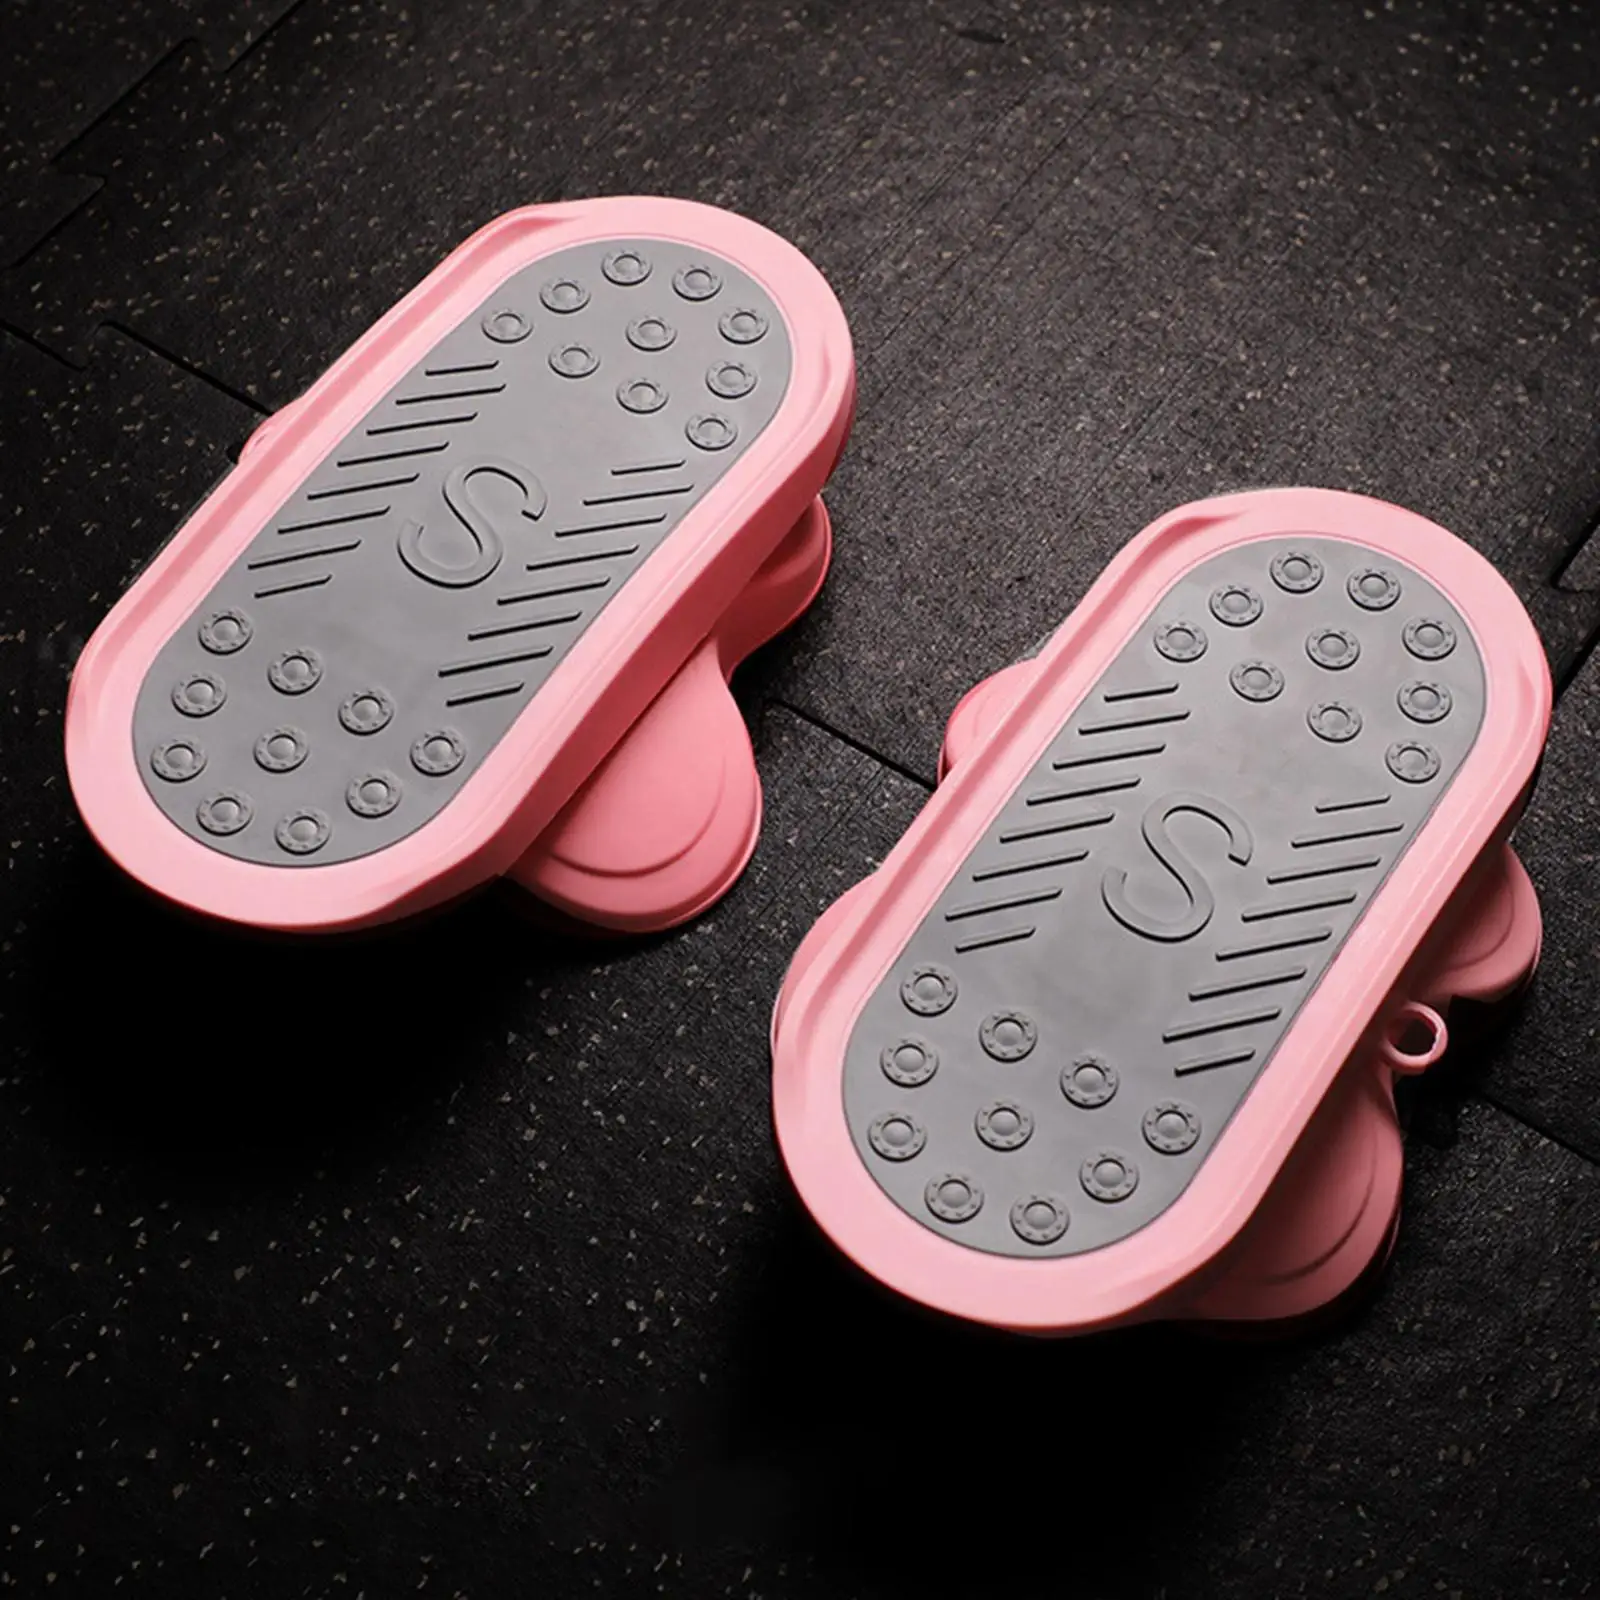 2x Ab Twisting Board Aerobic Exercise Balance Boards Foot Massage Mute Machine Waist Twist Disc for Shaping Gym